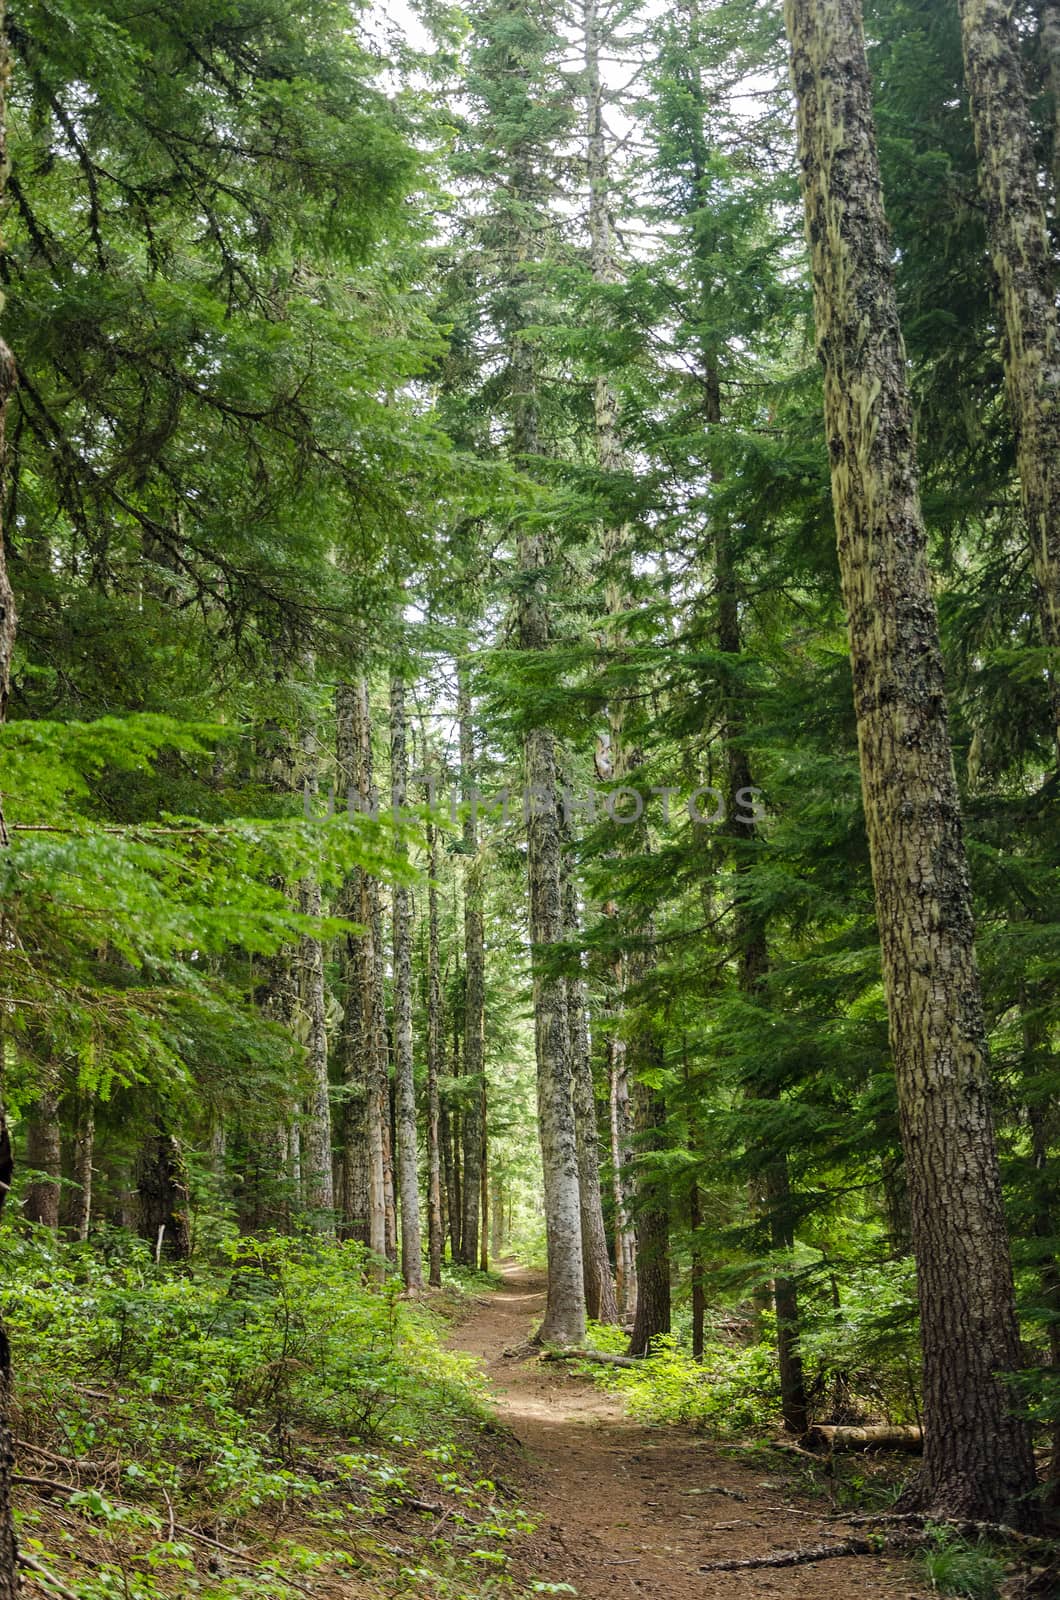 Trail passing through tall pine trees in Oregon